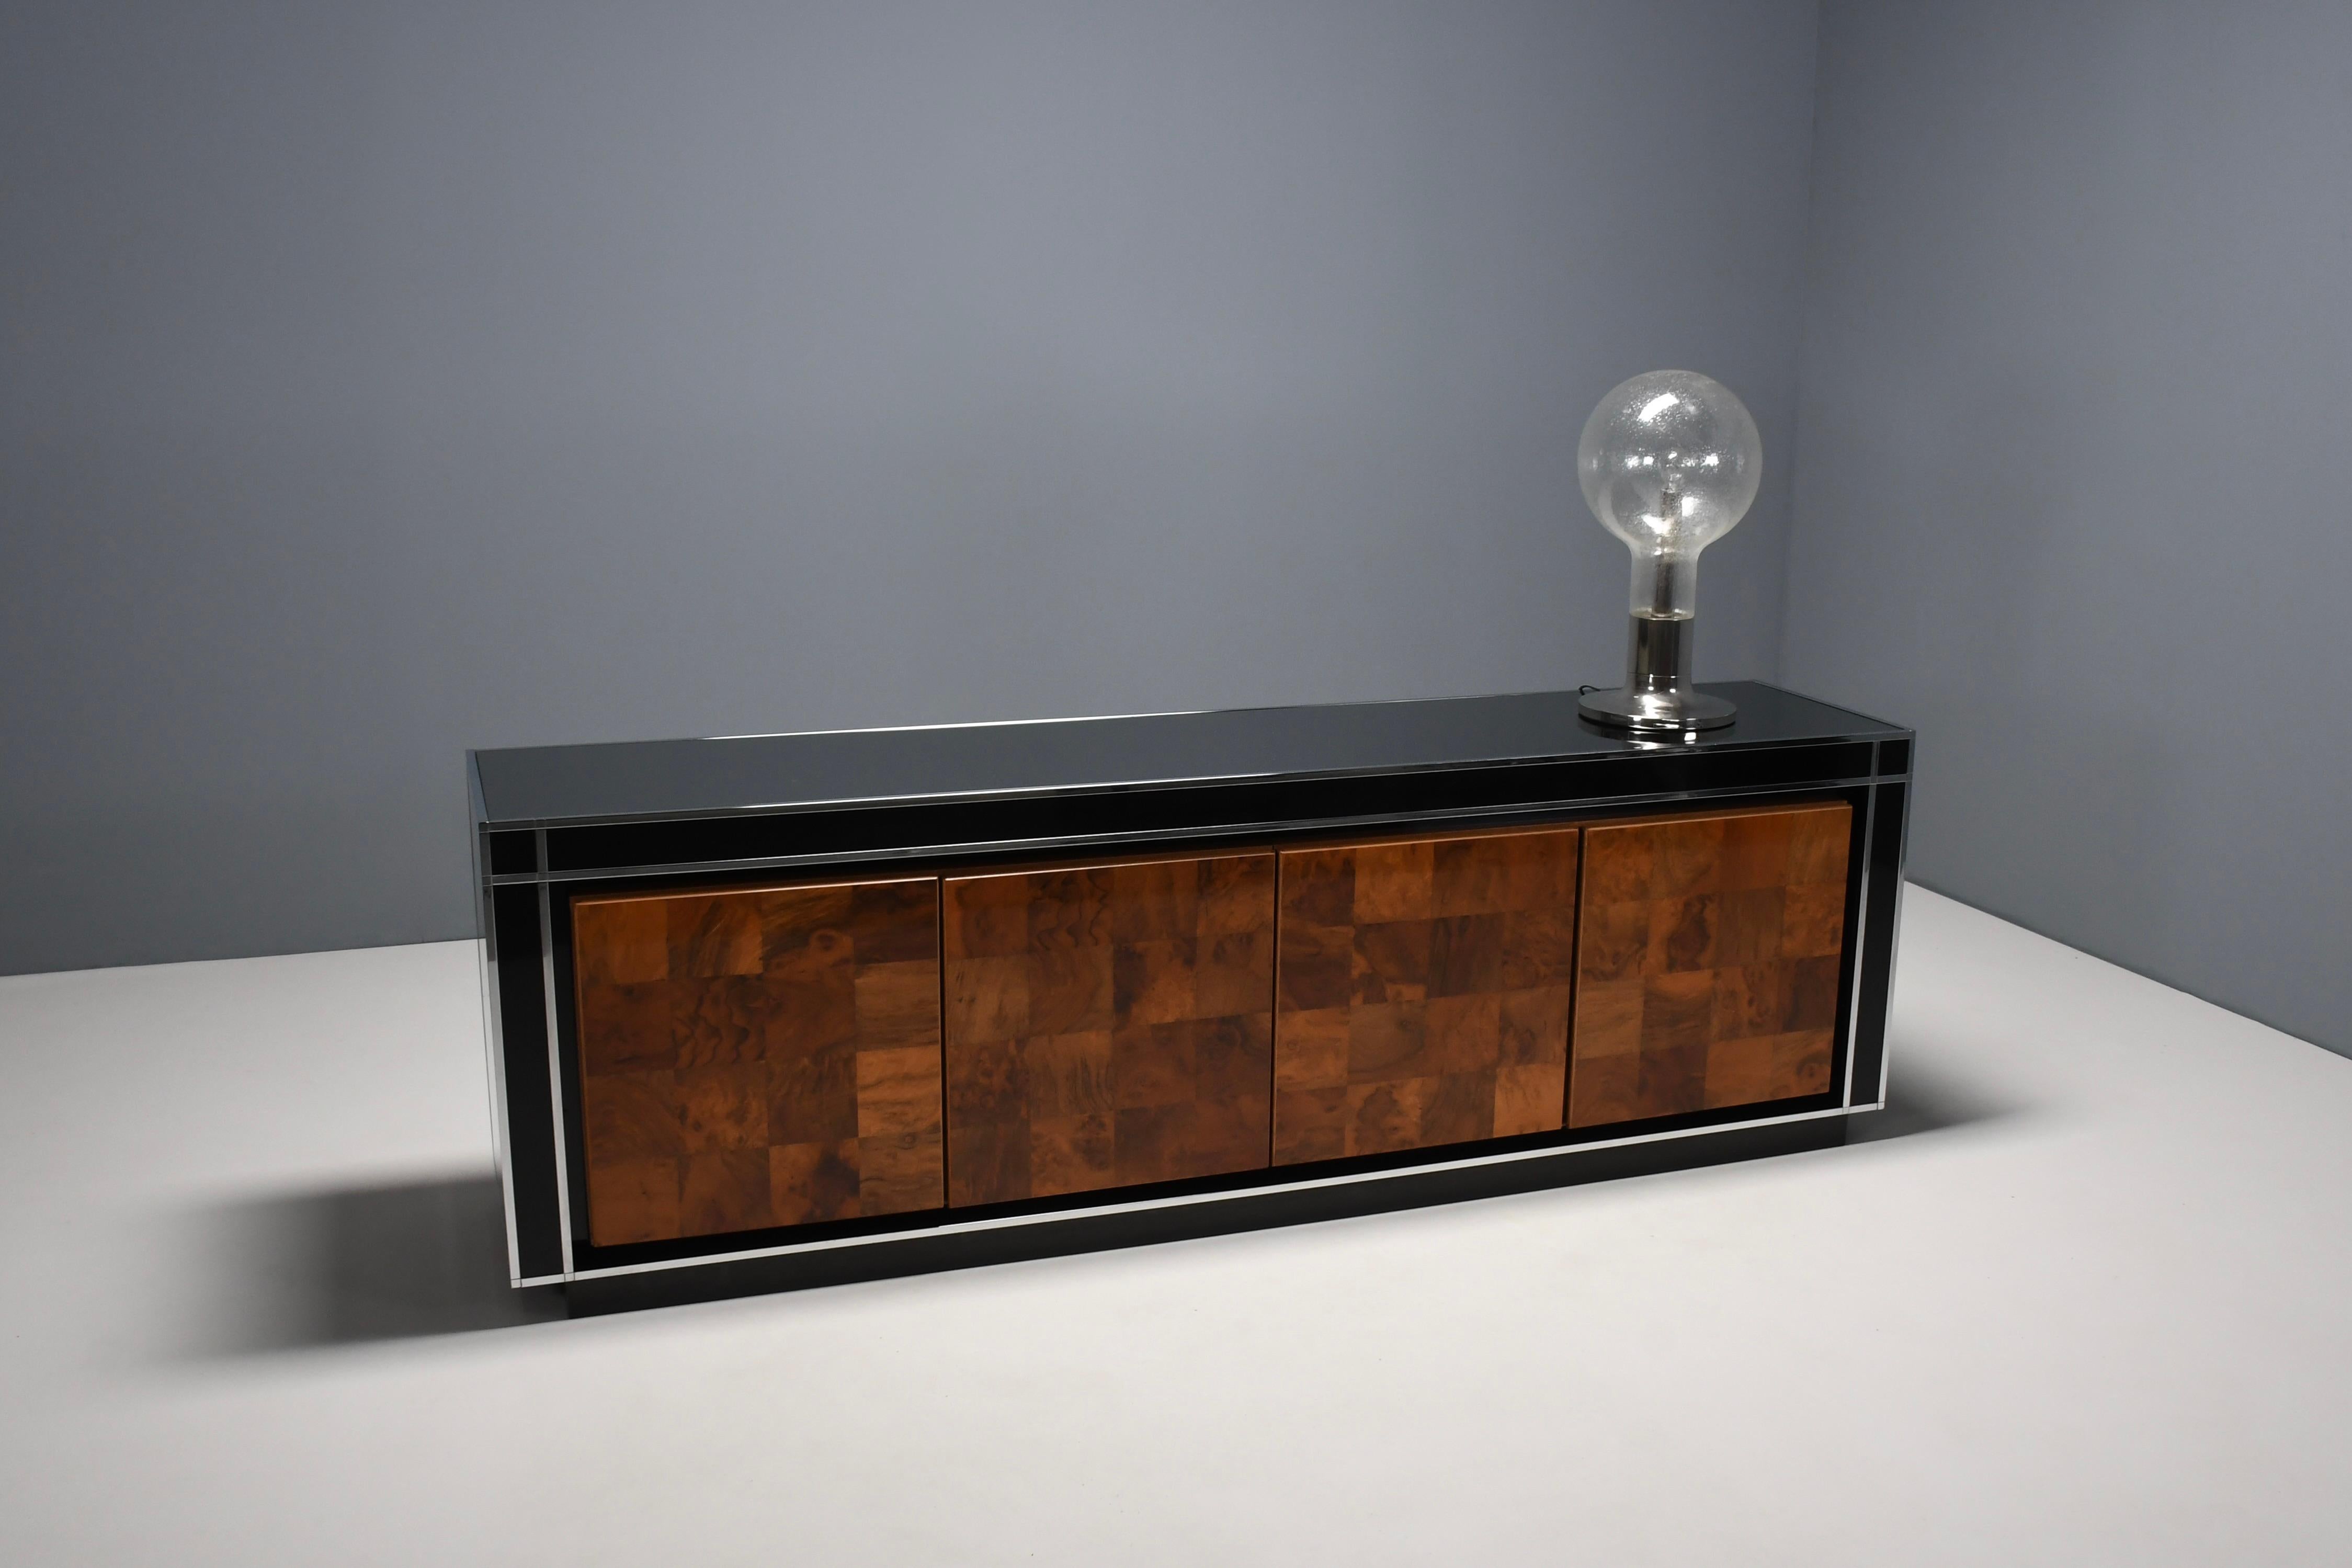 Italian Sideboard by Willy Rizzo for Mario Sabot, 1970s

Beautiful large sideboard in very good condition.

Designed by Willy Rizzo 

Produced by Mario Sabot, Italy 1970s 

This sideboard is finished in a glossy black veneer with chrome metal